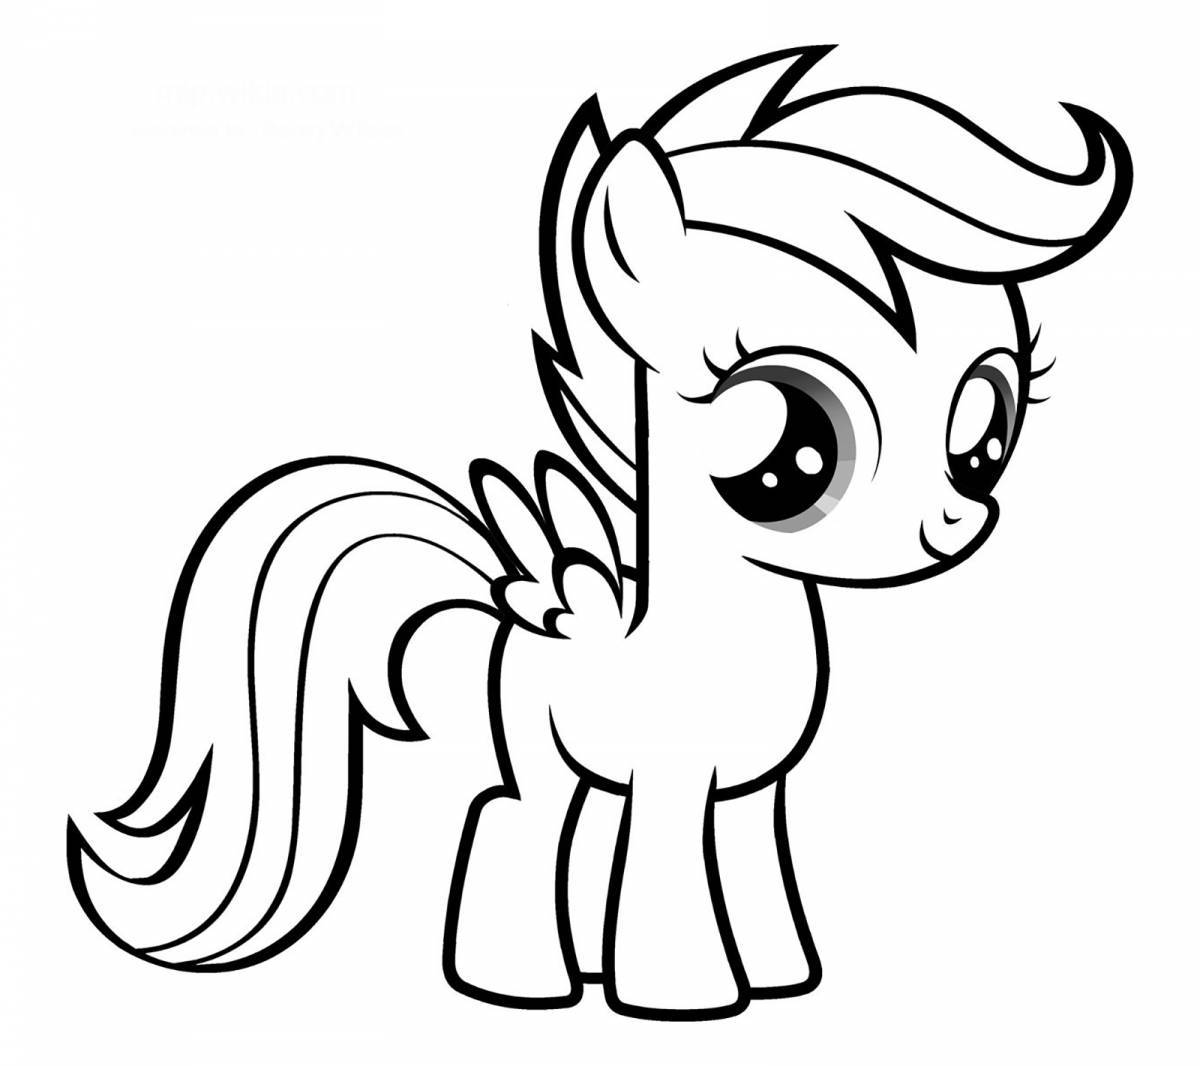 Radiant pony coloring page for kids